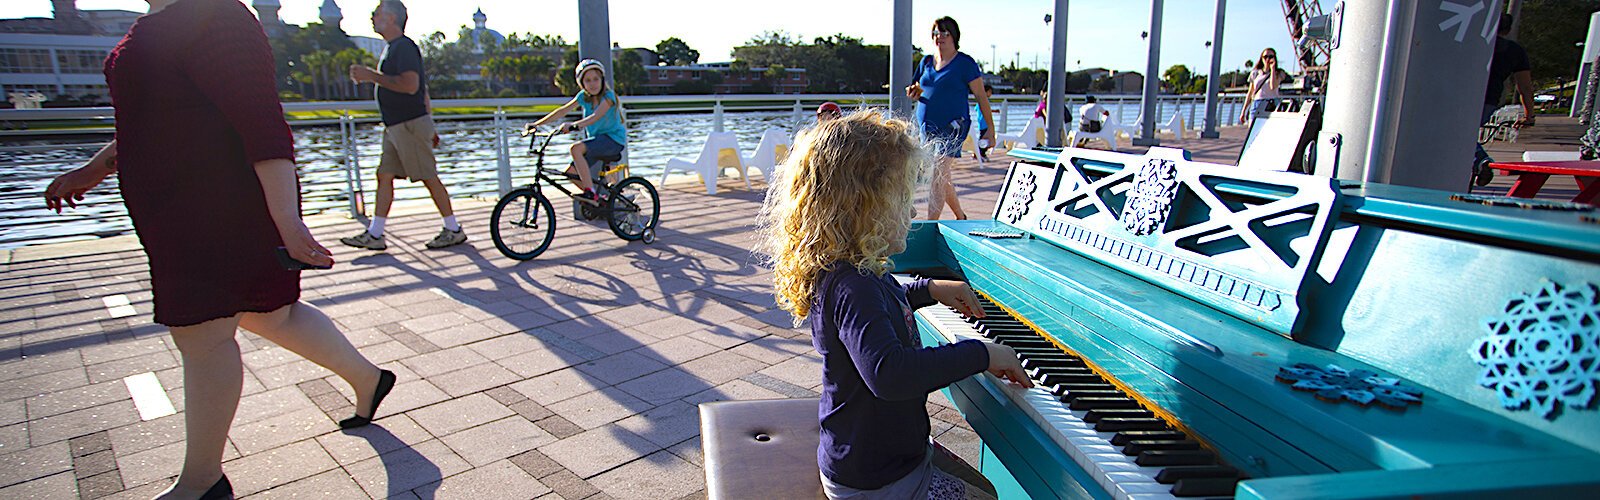 Winter Village at Curtis Hixon Park is complete with a "street piano" adorned with snowflakes for the holidays.